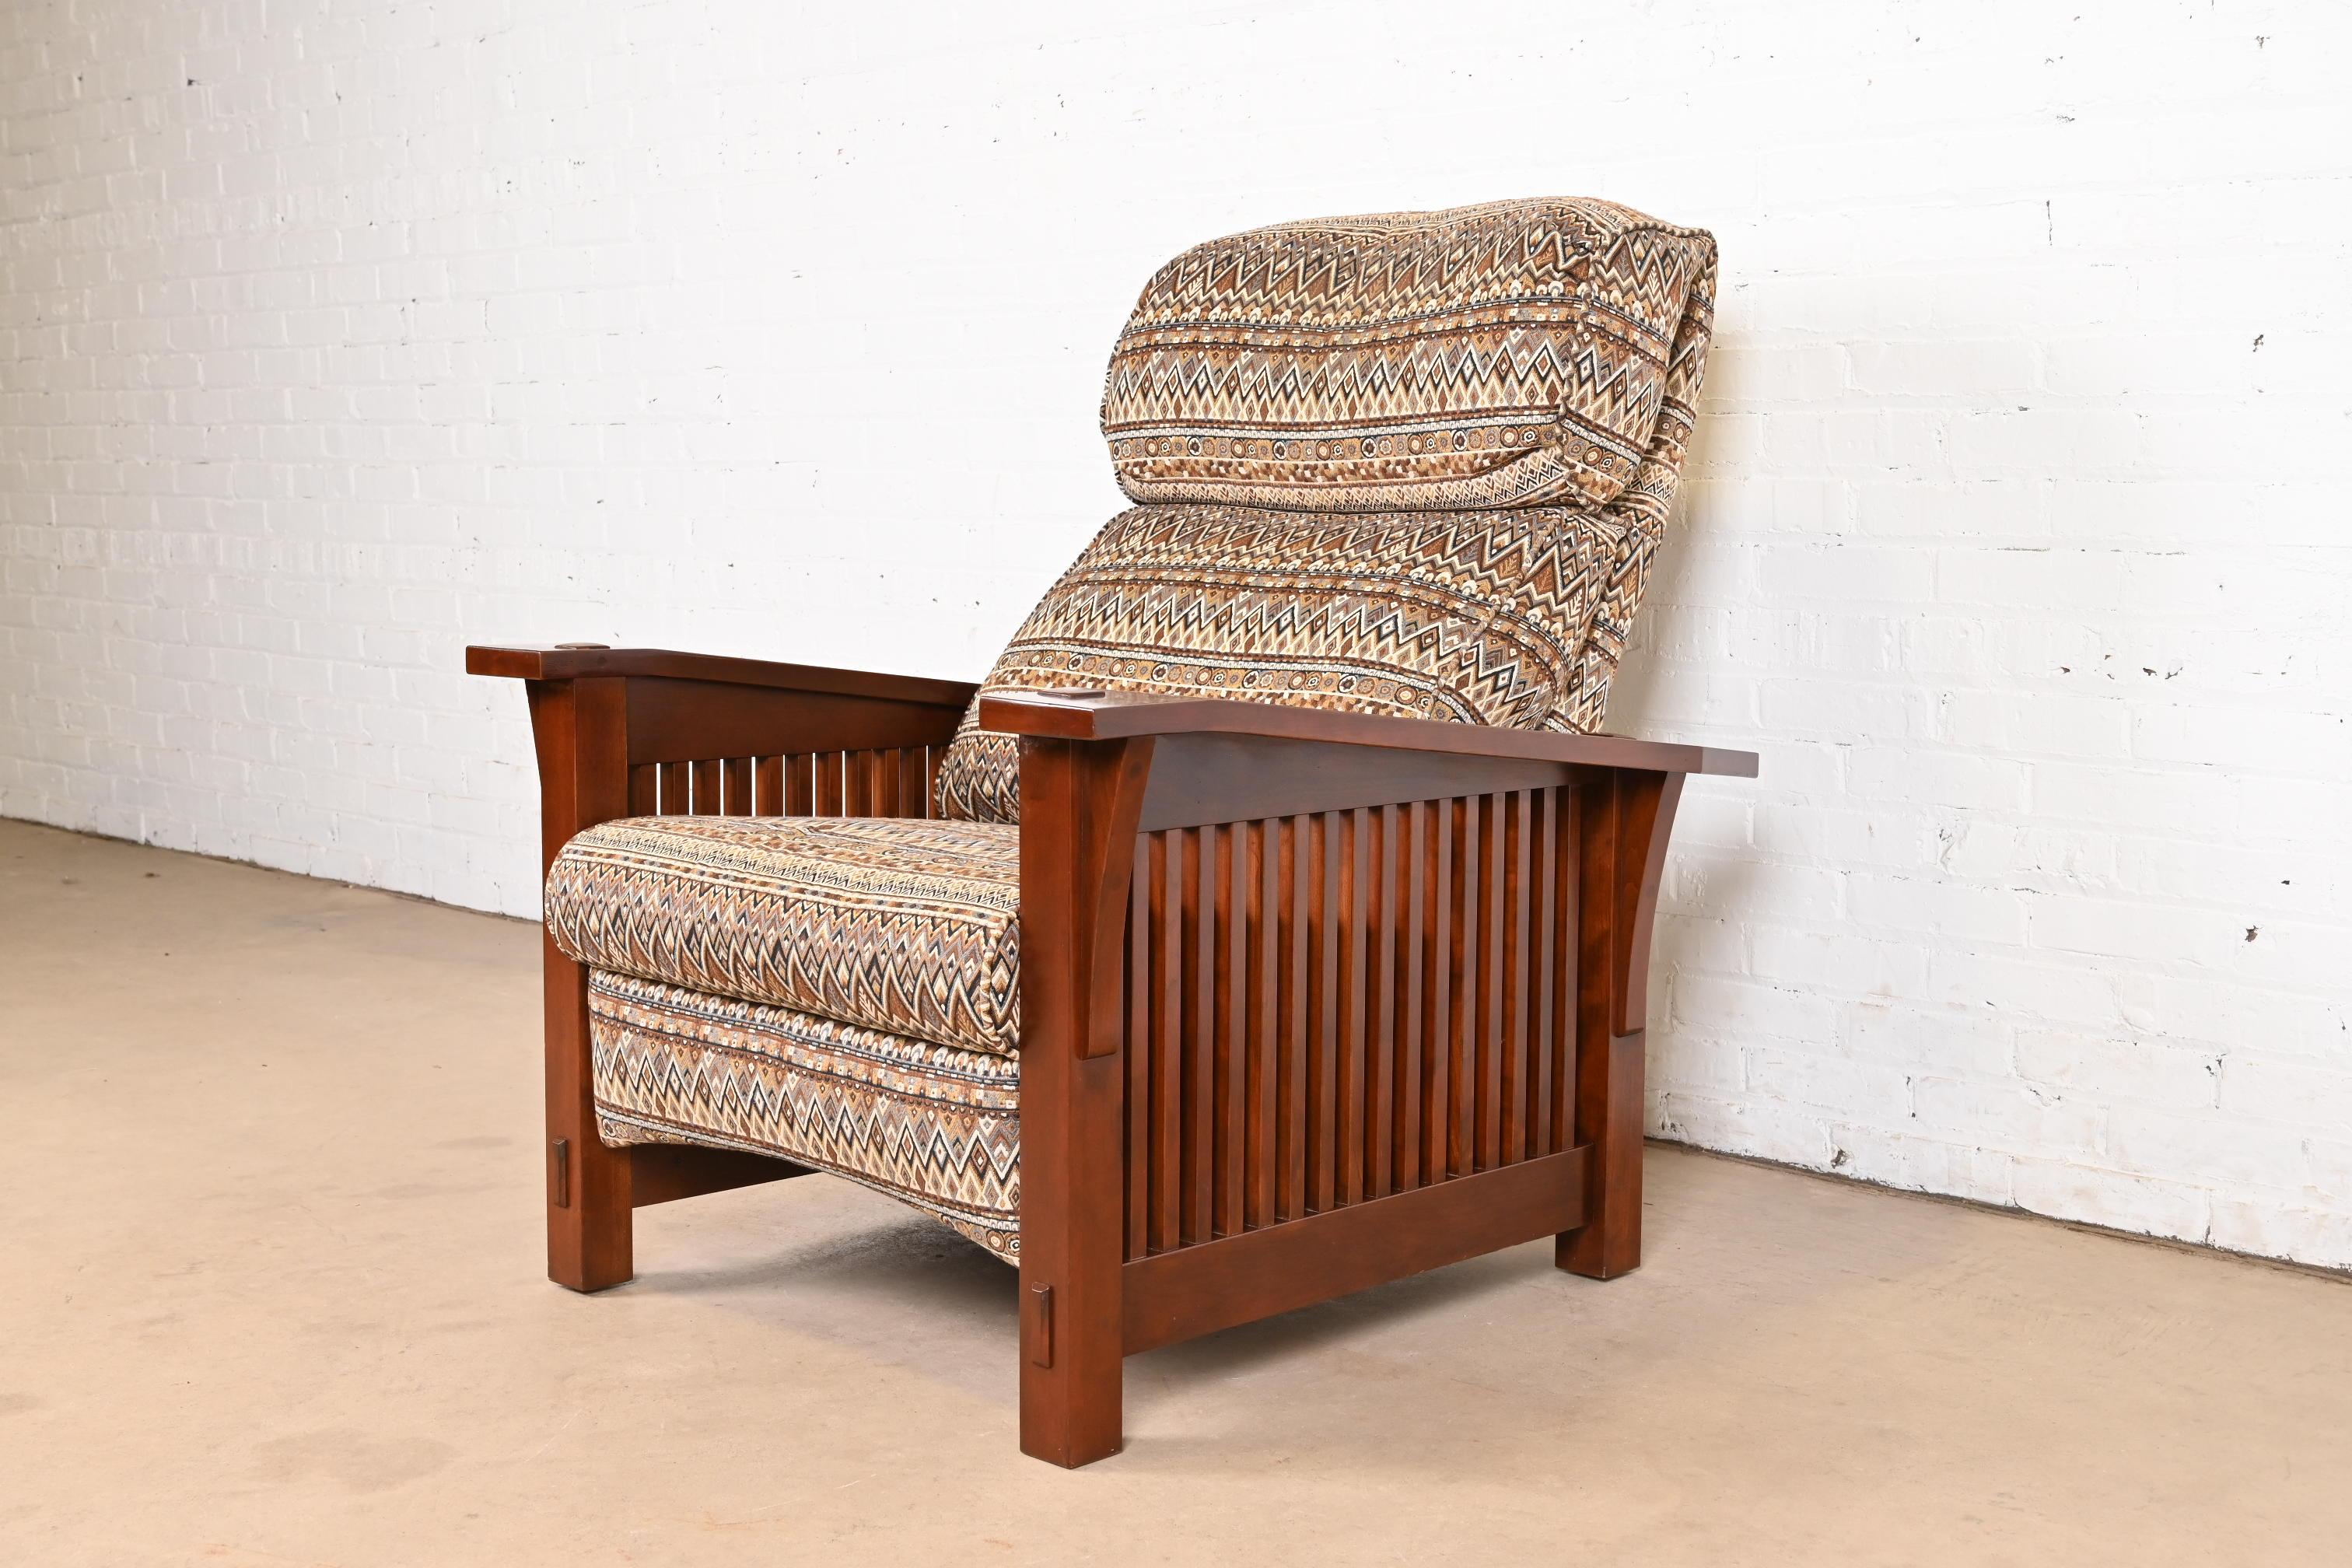 American Stickley Mission Arts & Crafts Cherry Wood Spindle Reclining Morris Lounge Chair